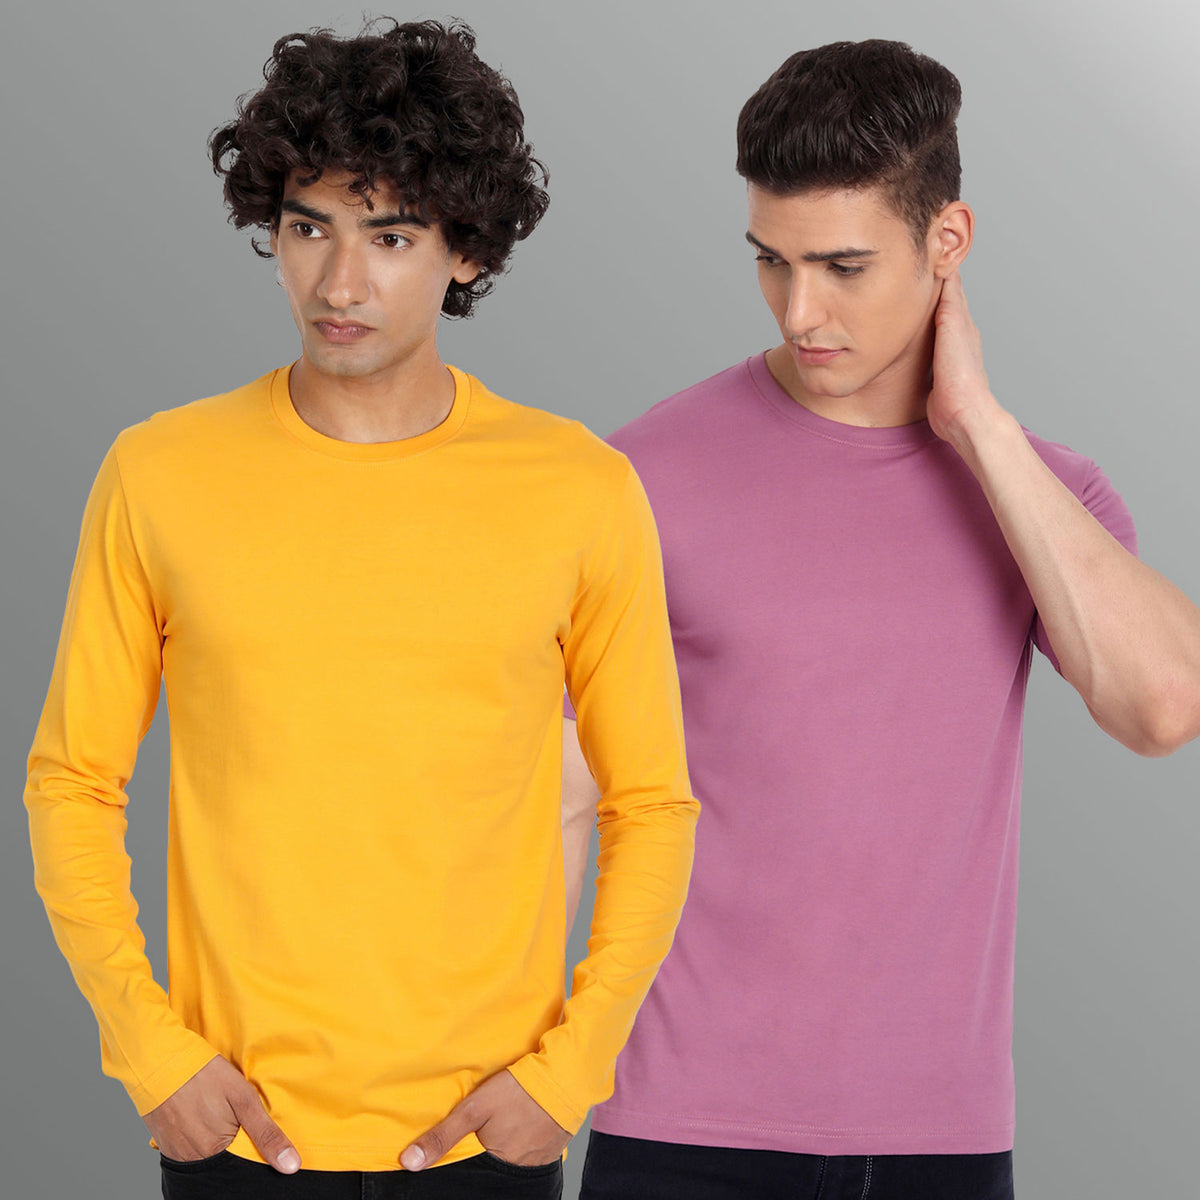 Full Sleeve Yellow and Half Sleeve Onion T-shirt Combo For Men